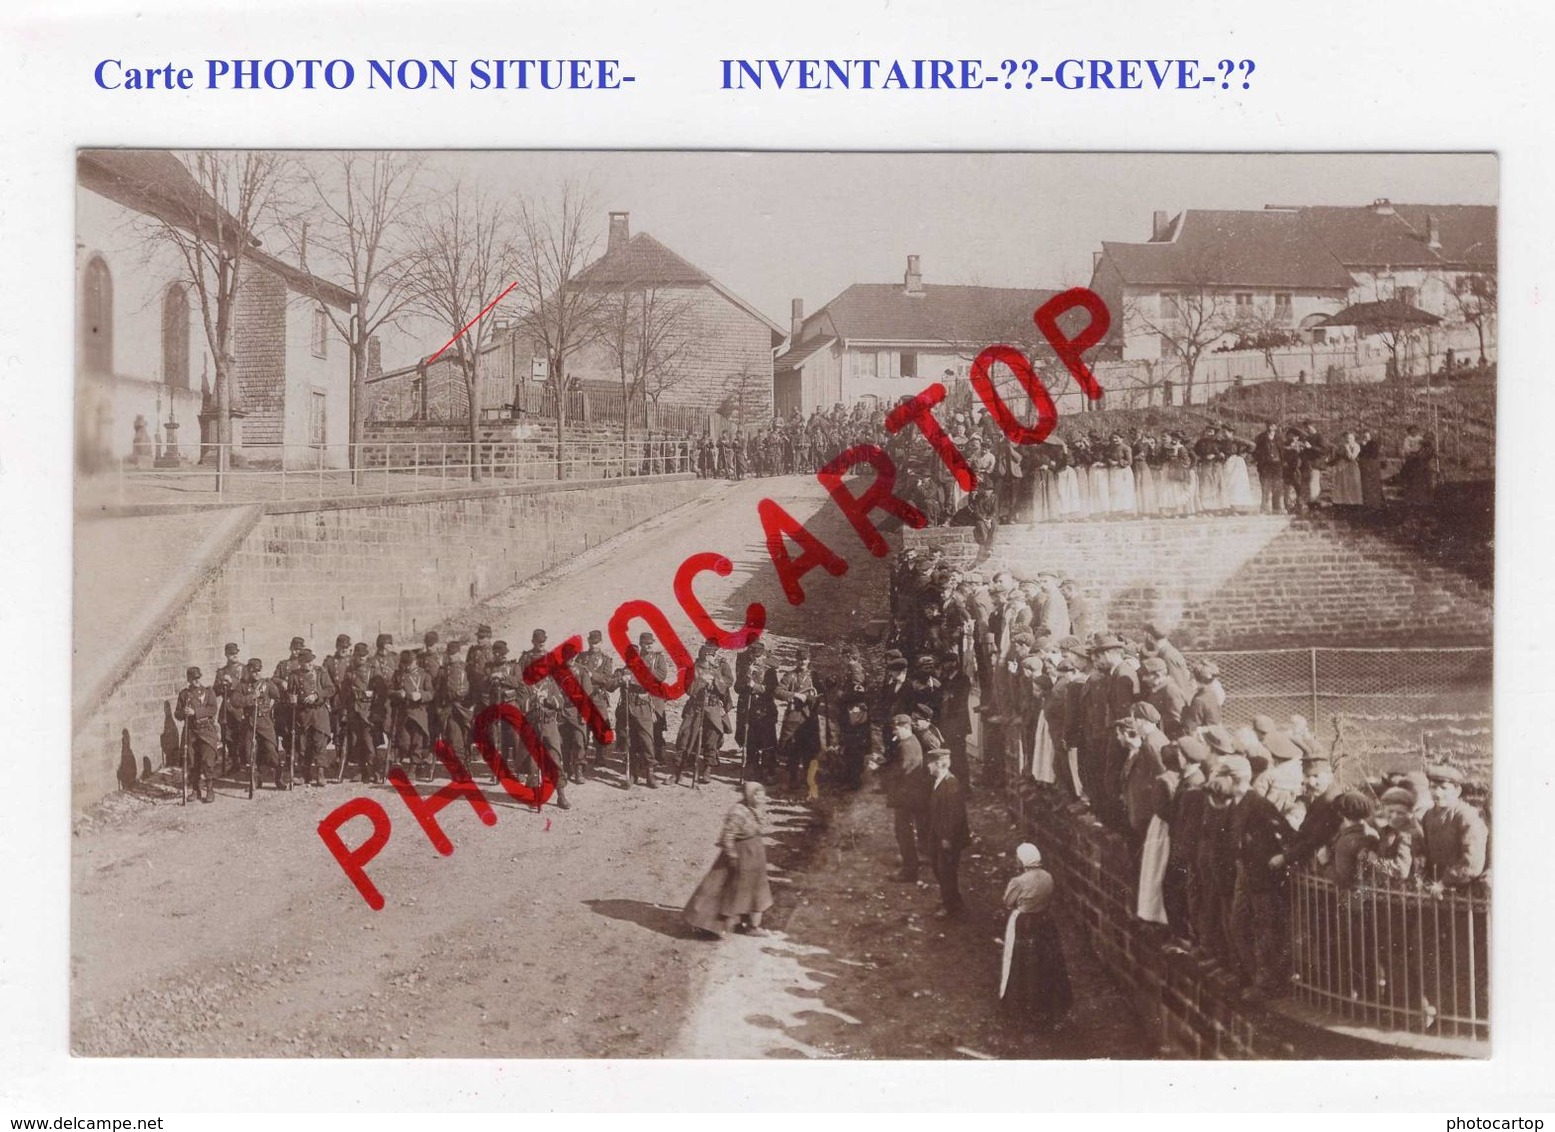 INVENTAIRE-GREVE-??-ARMEE-CARTE PHOTO Francaise NON SITUEE-FRANCE- - Strikes